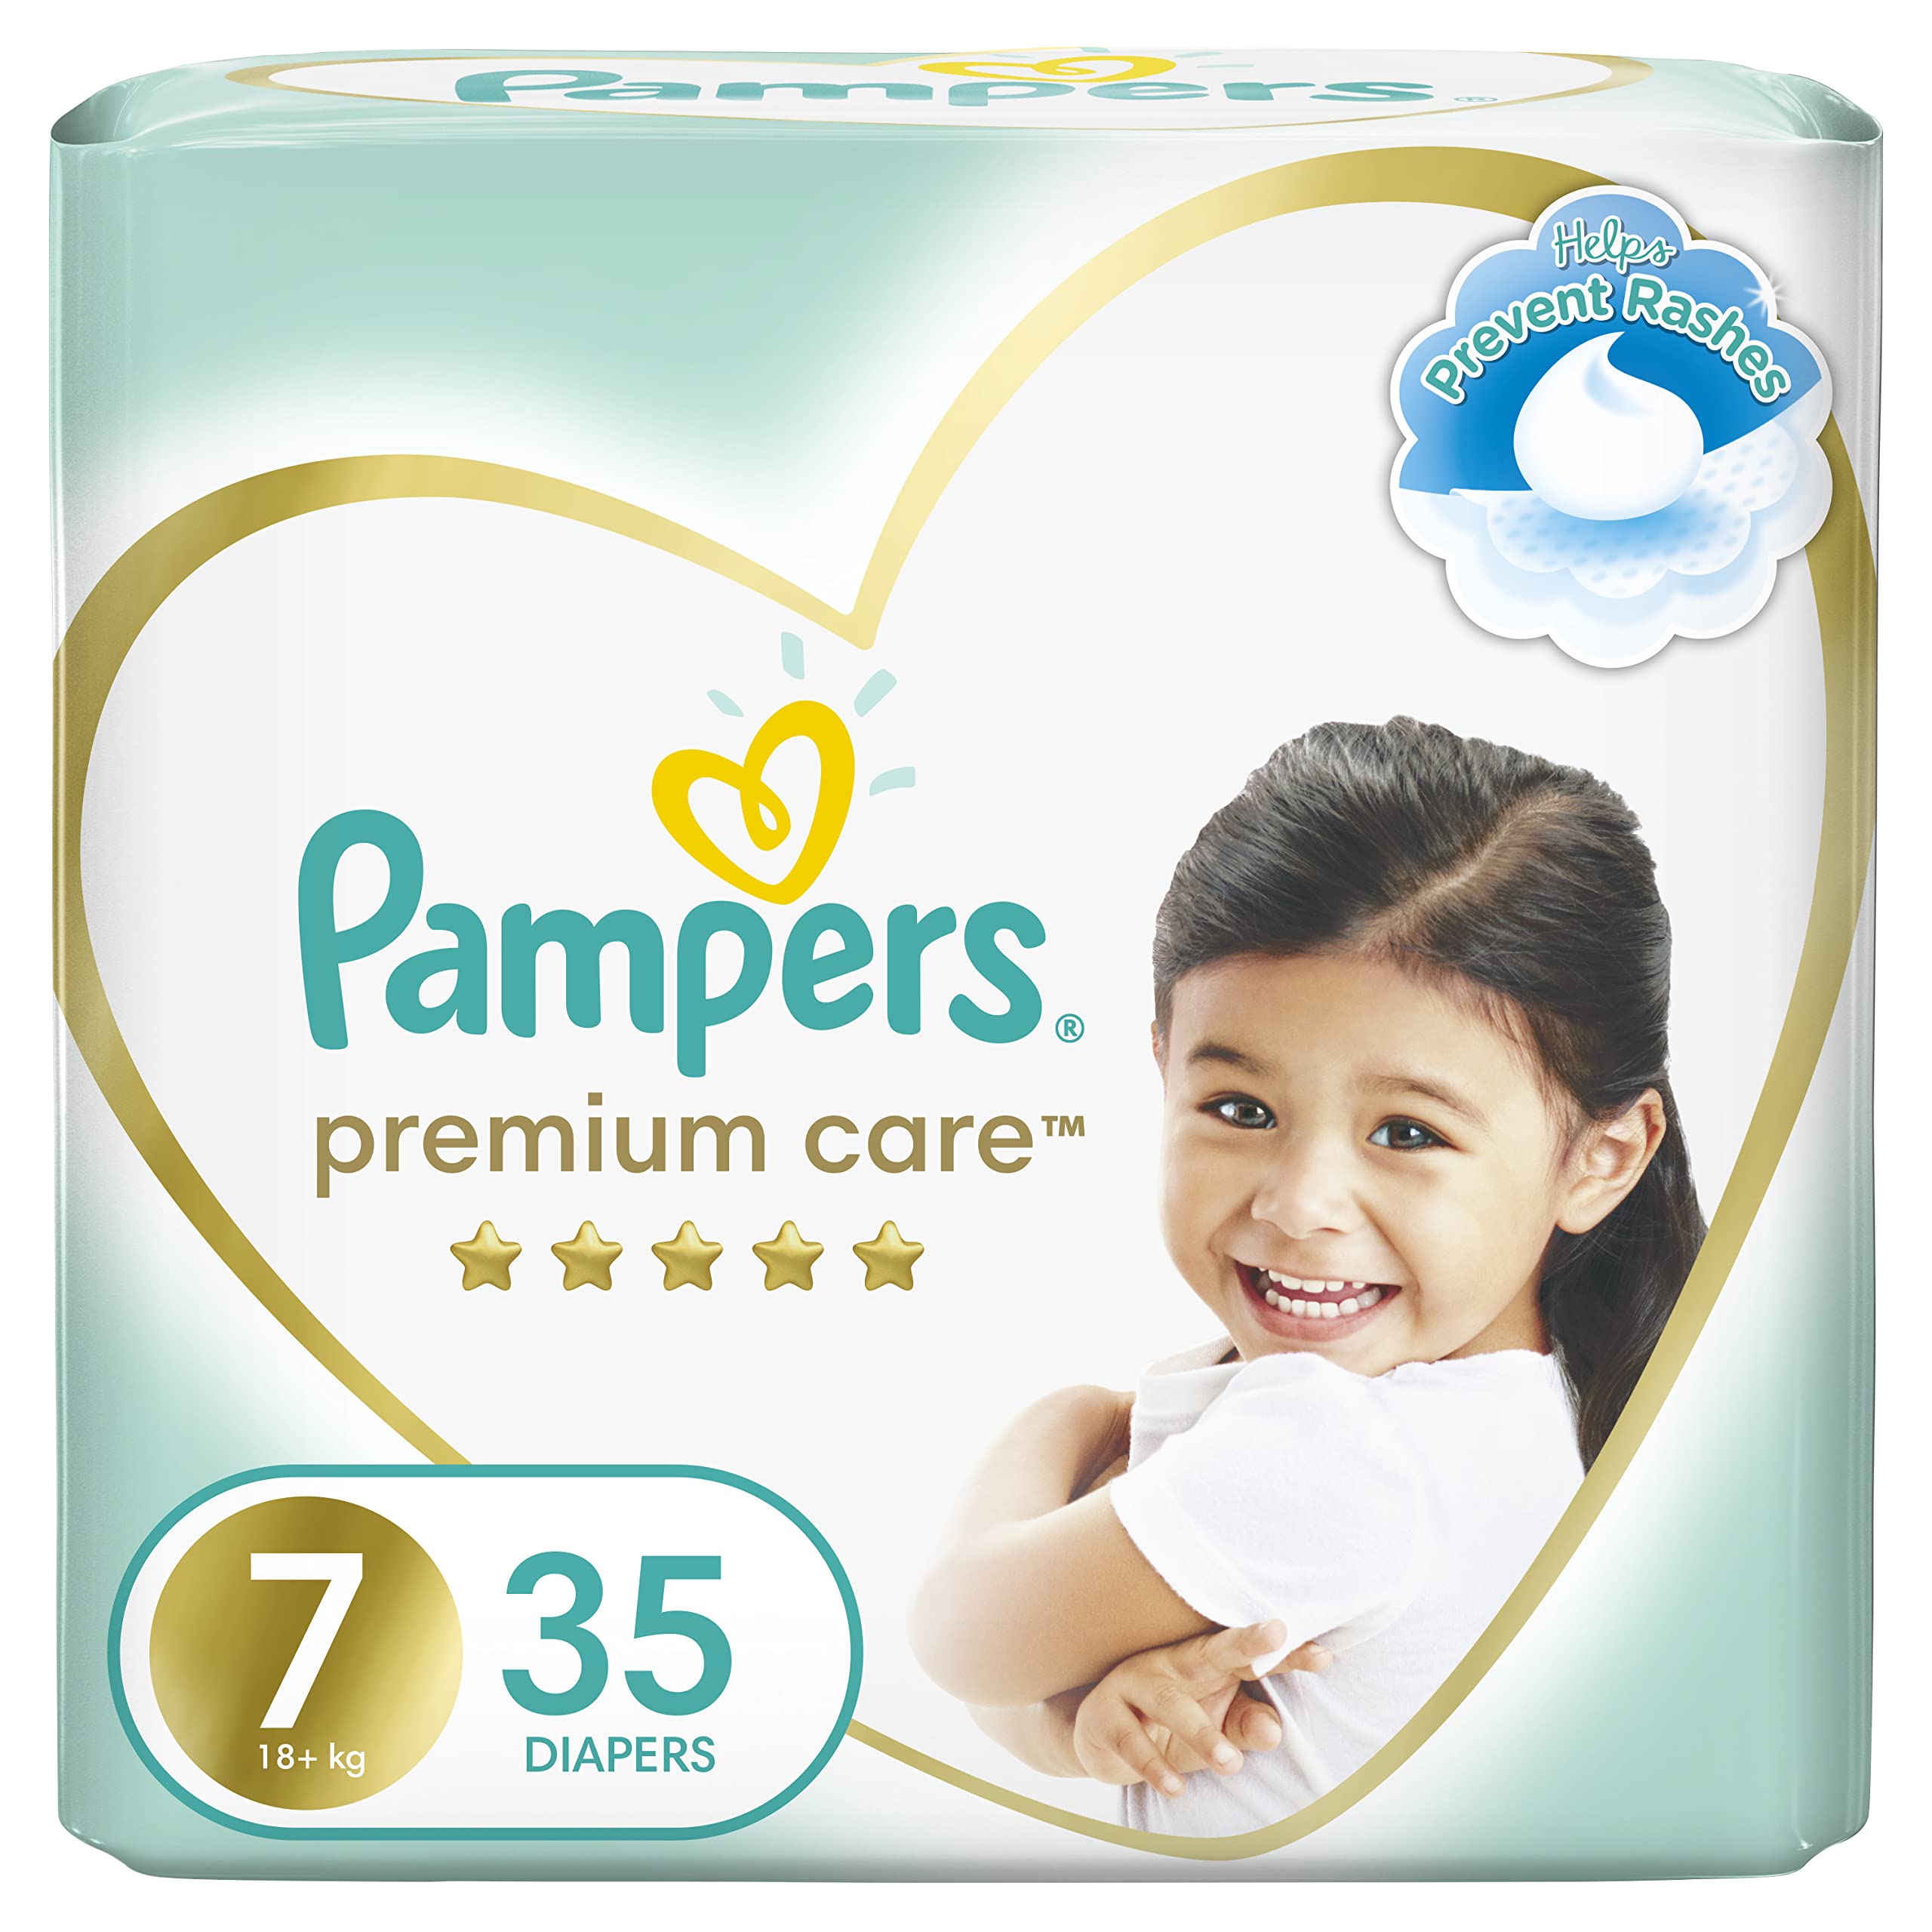 Pampers Premium Care, Size 7, Extra Large+, 18+ kg, 35 Diapers